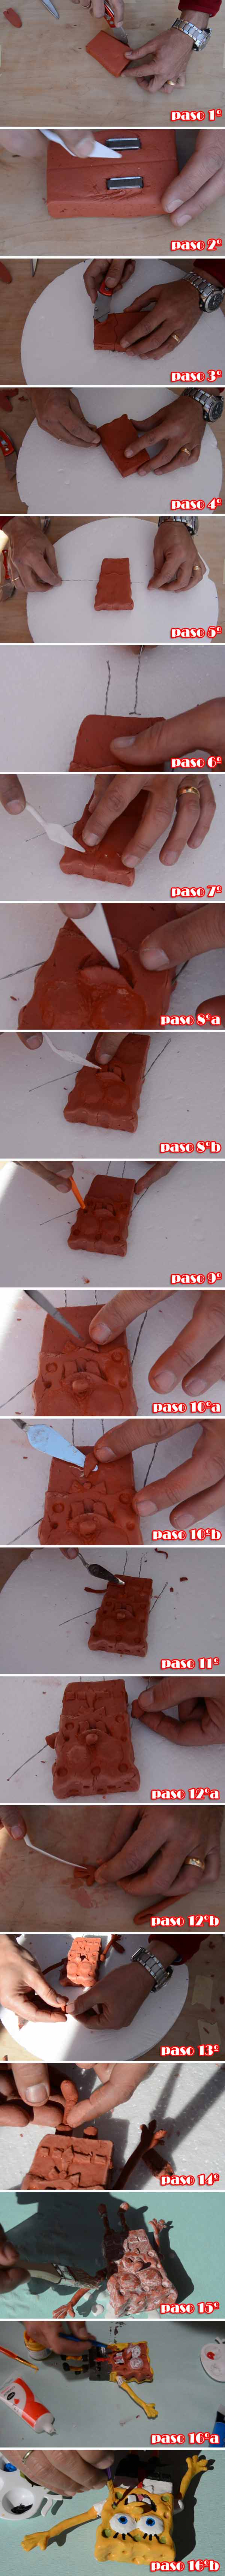 Spongebob 3D modeling with clay 3 - photo tutorial